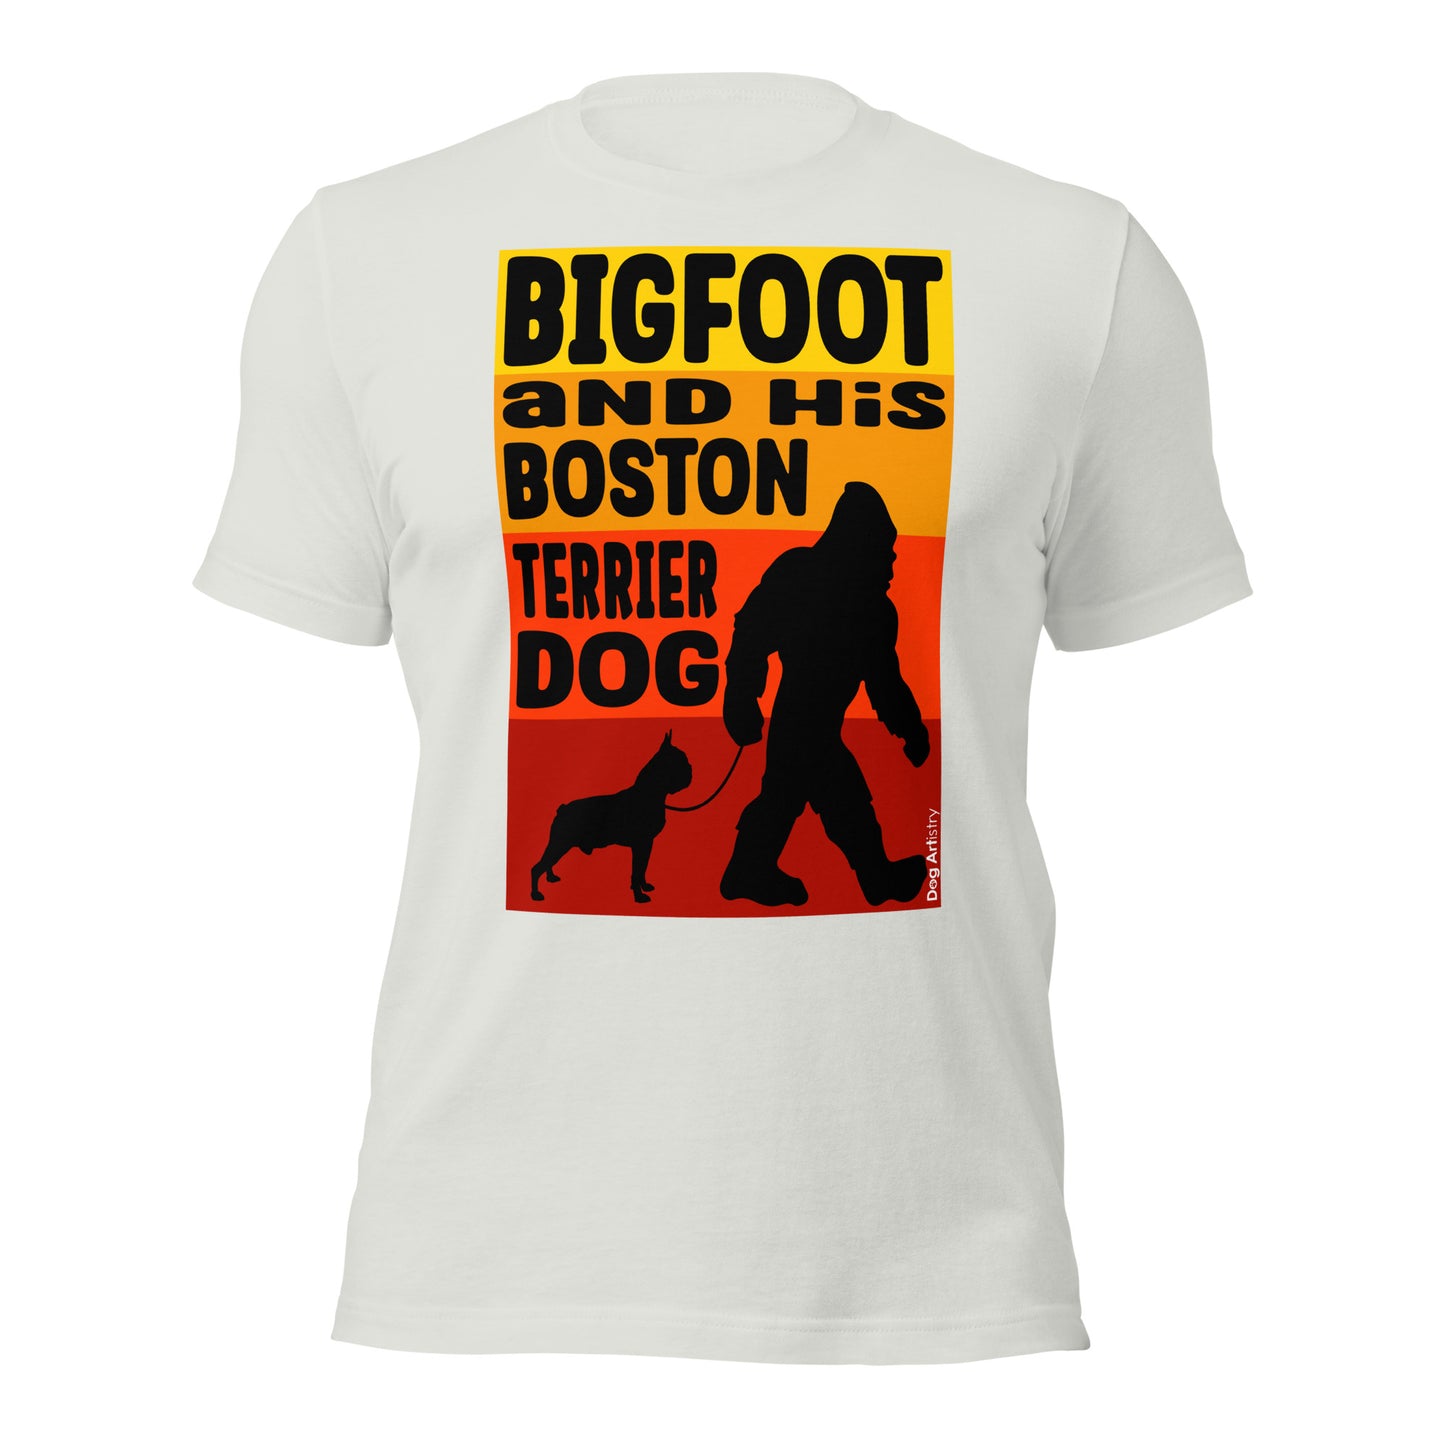 Big foot and his Boston Terrier unisex silver t-shirt by Dog Artistry.